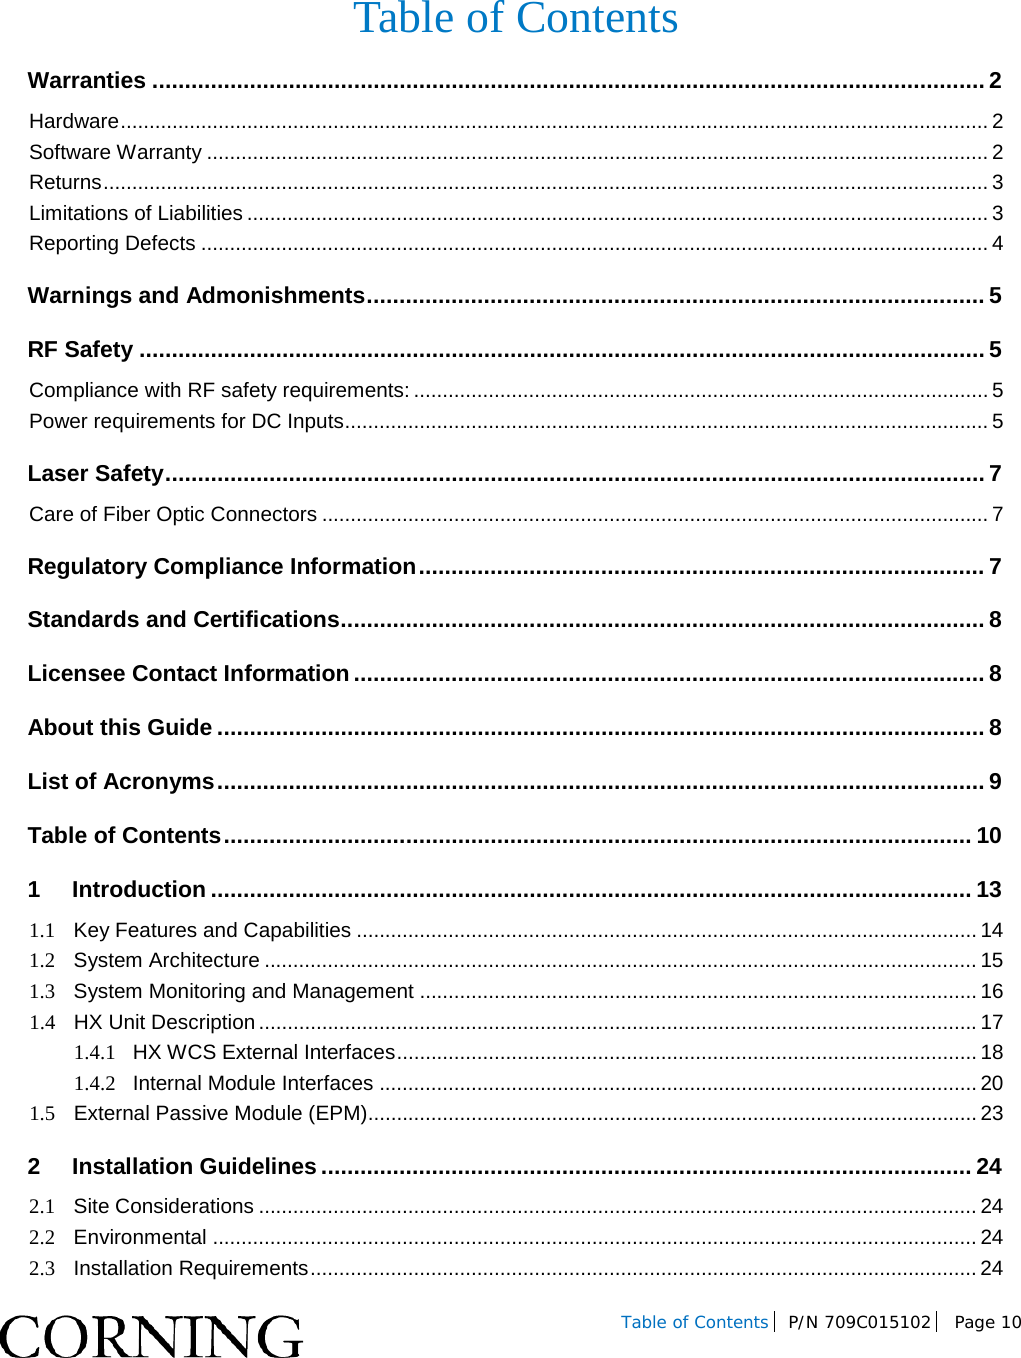   Table of Contents P/N 709C015102  Page 10   Table of Contents Warranties ................................................................................................................................ 2 Hardware ....................................................................................................................................................... 2 Software Warranty ........................................................................................................................................ 2 Returns .......................................................................................................................................................... 3 Limitations of Liabilities ................................................................................................................................. 3 Reporting Defects ......................................................................................................................................... 4 Warnings and Admonishments ............................................................................................... 5 RF Safety .................................................................................................................................. 5 Compliance with RF safety requirements: .................................................................................................... 5 Power requirements for DC Inputs ................................................................................................................ 5 Laser Safety .............................................................................................................................. 7 Care of Fiber Optic Connectors .................................................................................................................... 7 Regulatory Compliance Information ....................................................................................... 7 Standards and Certifications ................................................................................................... 8 Licensee Contact Information ................................................................................................. 8 About this Guide ...................................................................................................................... 8 List of Acronyms ...................................................................................................................... 9 Table of Contents ................................................................................................................... 10 1 Introduction ..................................................................................................................... 13 1.1 Key Features and Capabilities ............................................................................................................ 14 1.2 System Architecture ............................................................................................................................ 15 1.3 System Monitoring and Management ................................................................................................. 16 1.4 HX Unit Description ............................................................................................................................. 17 1.4.1 HX WCS External Interfaces ..................................................................................................... 18 1.4.2 Internal Module Interfaces ........................................................................................................ 20 1.5 External Passive Module (EPM).......................................................................................................... 23 2 Installation Guidelines .................................................................................................... 24 2.1 Site Considerations ............................................................................................................................. 24 2.2 Environmental ..................................................................................................................................... 24 2.3 Installation Requirements .................................................................................................................... 24 